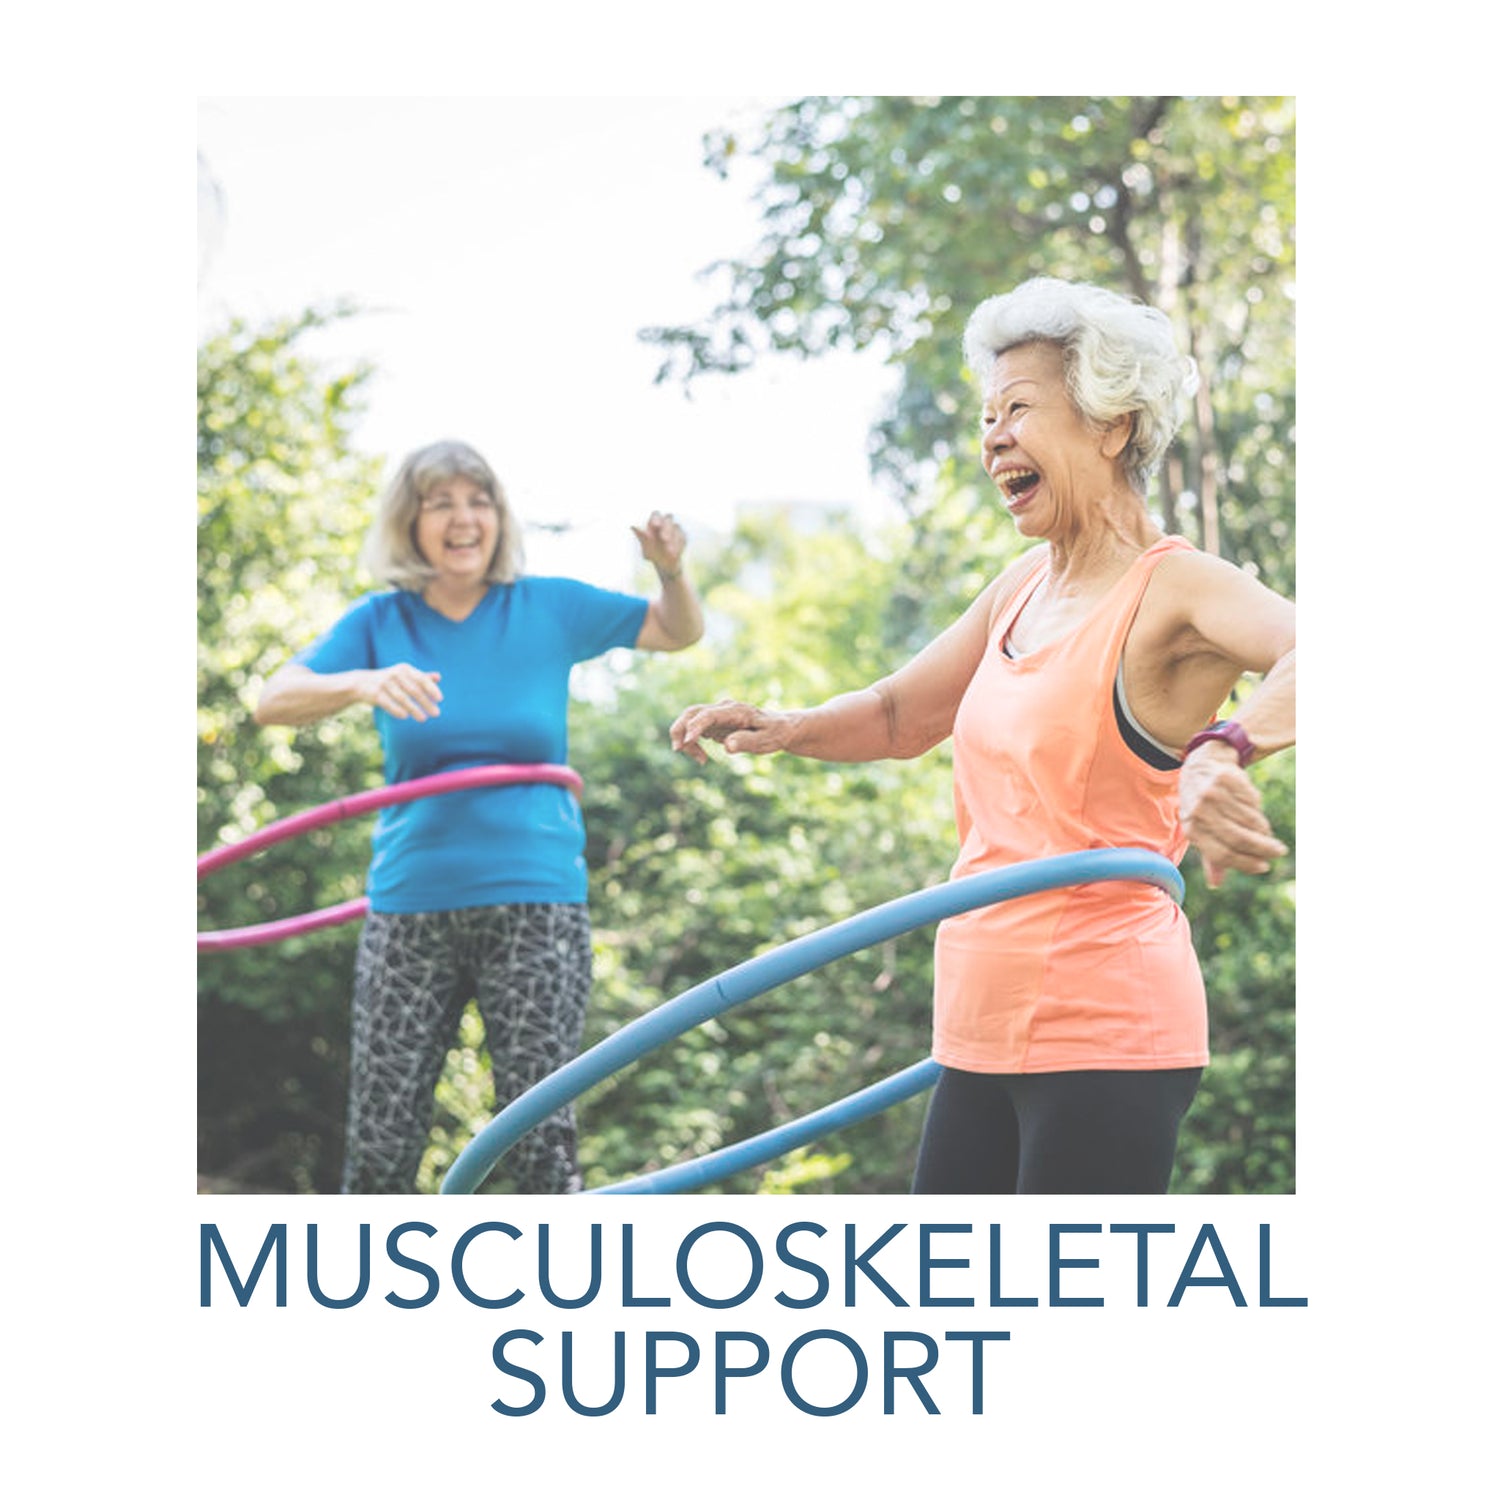 Musculoskeletal Support